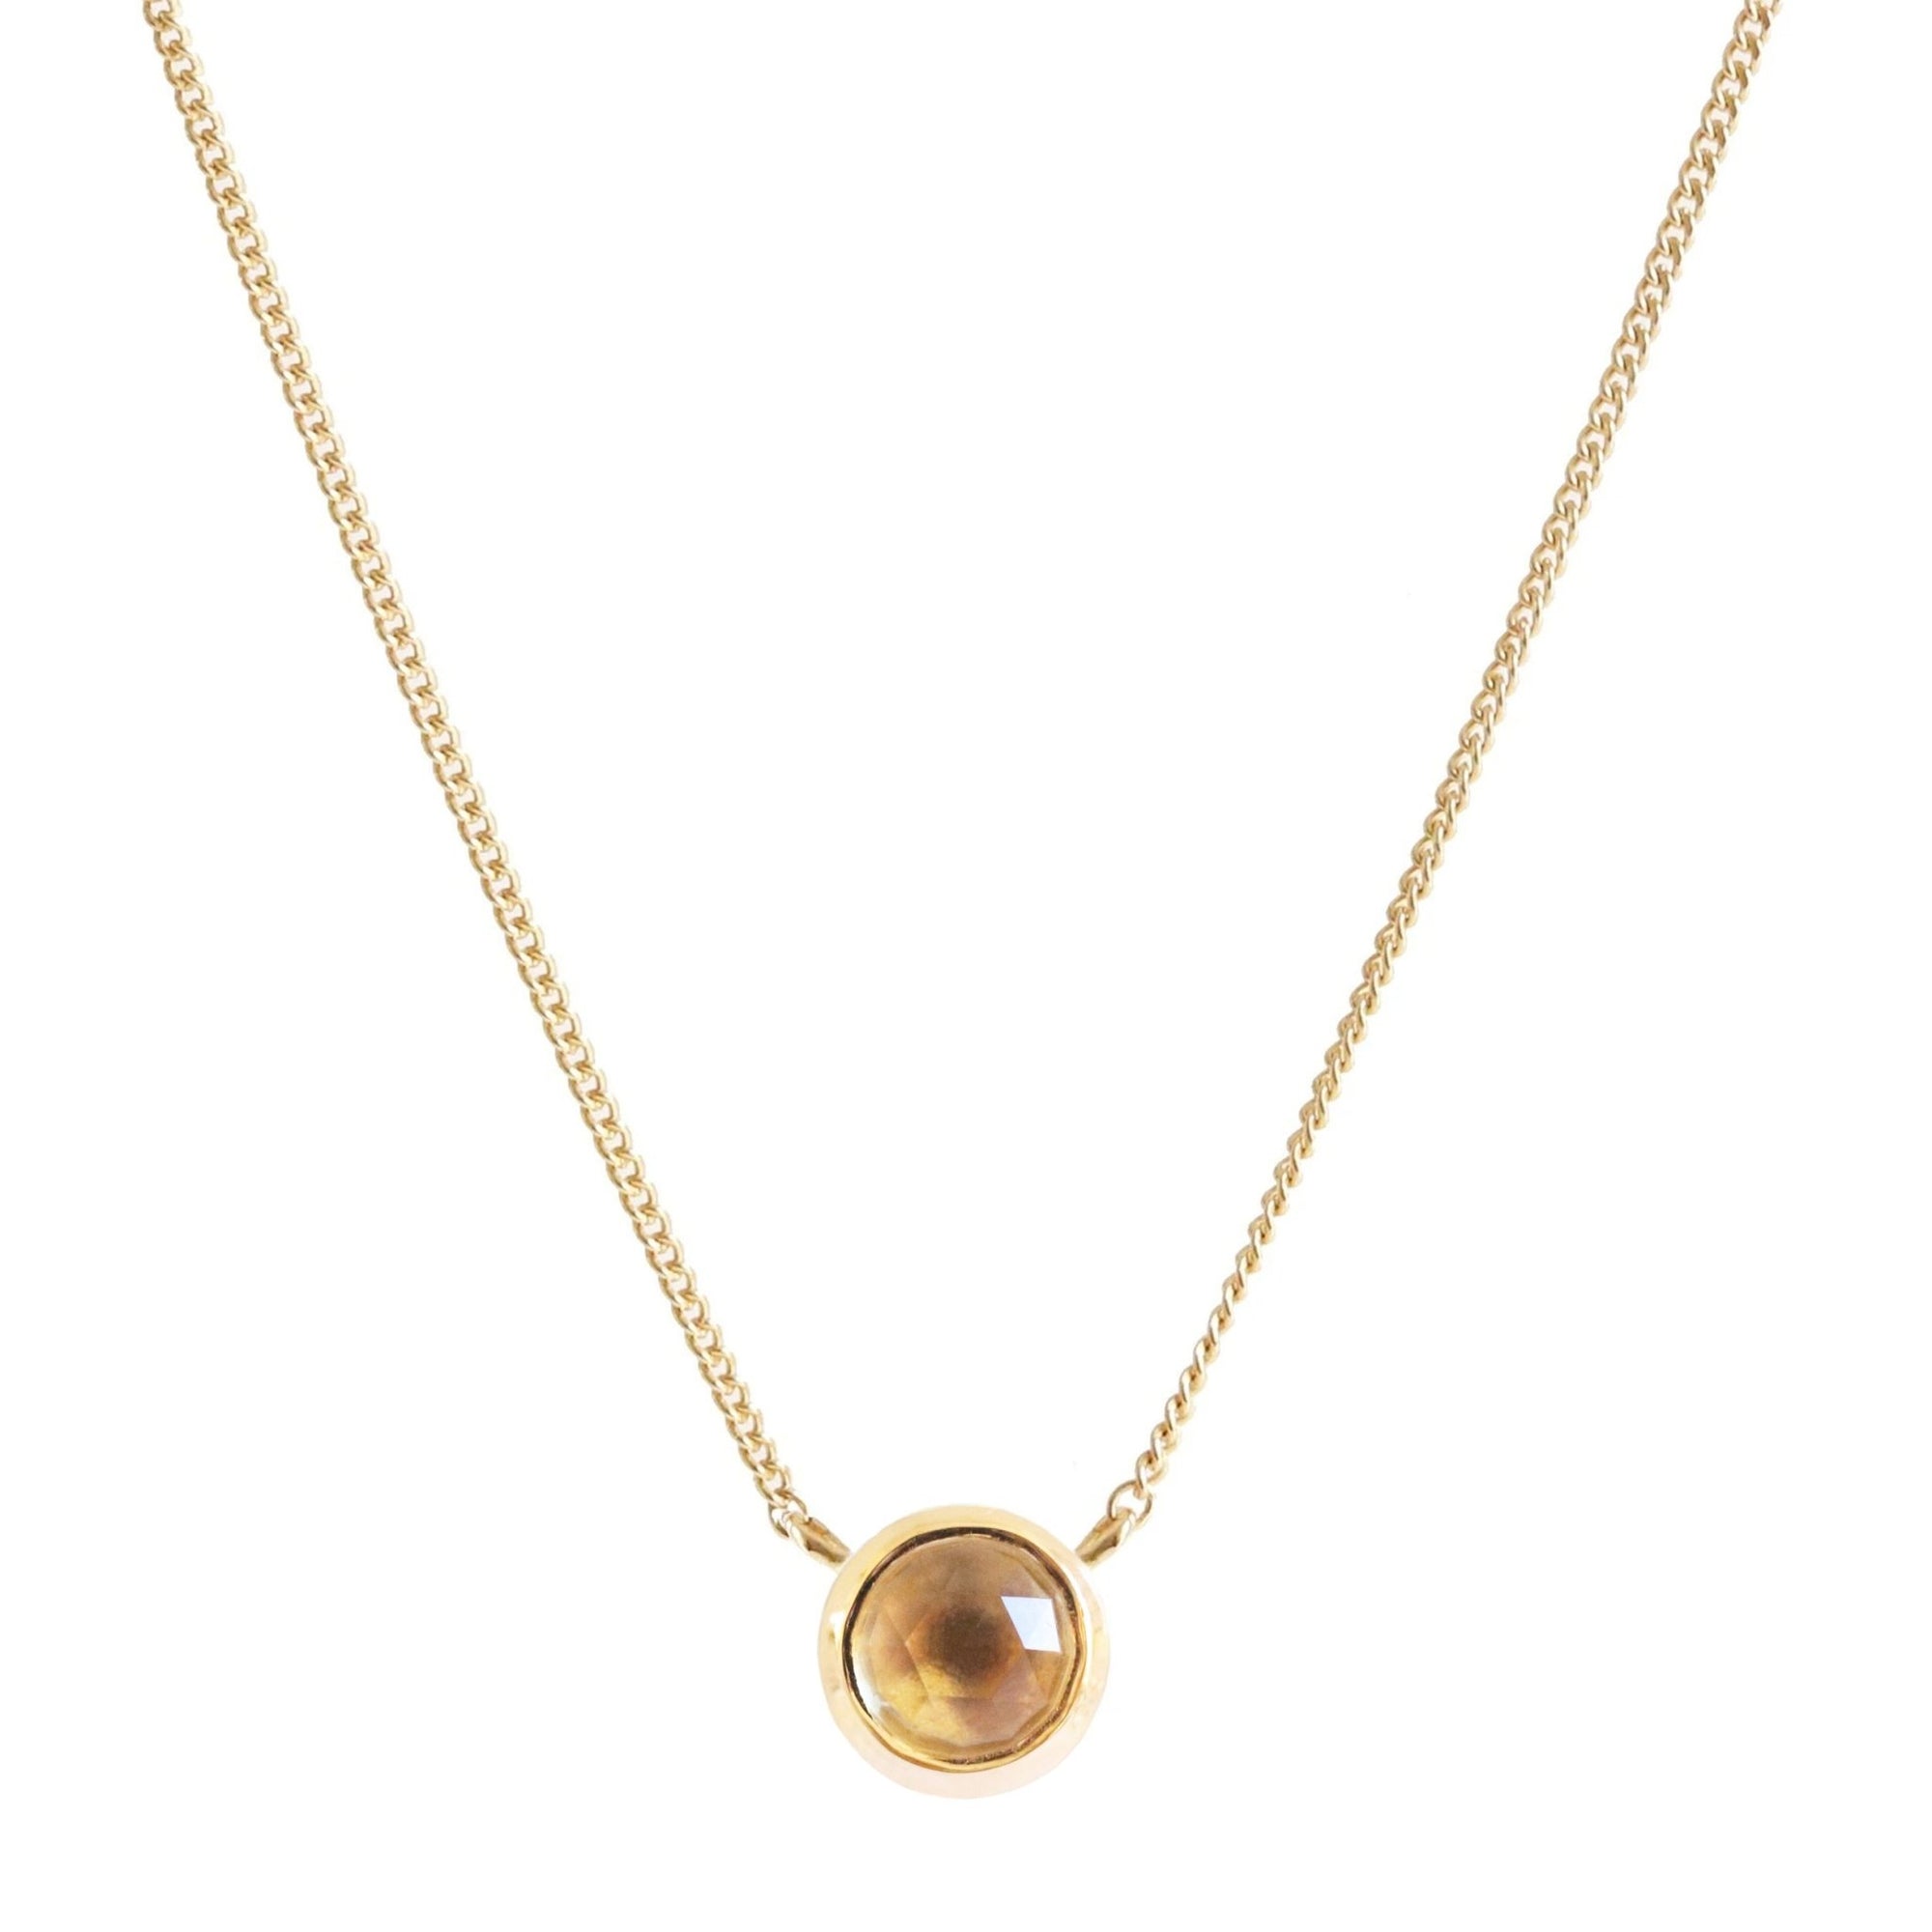 DAINTY LEGACY NECKLACE - CITRINE & GOLD - SO PRETTY CARA COTTER